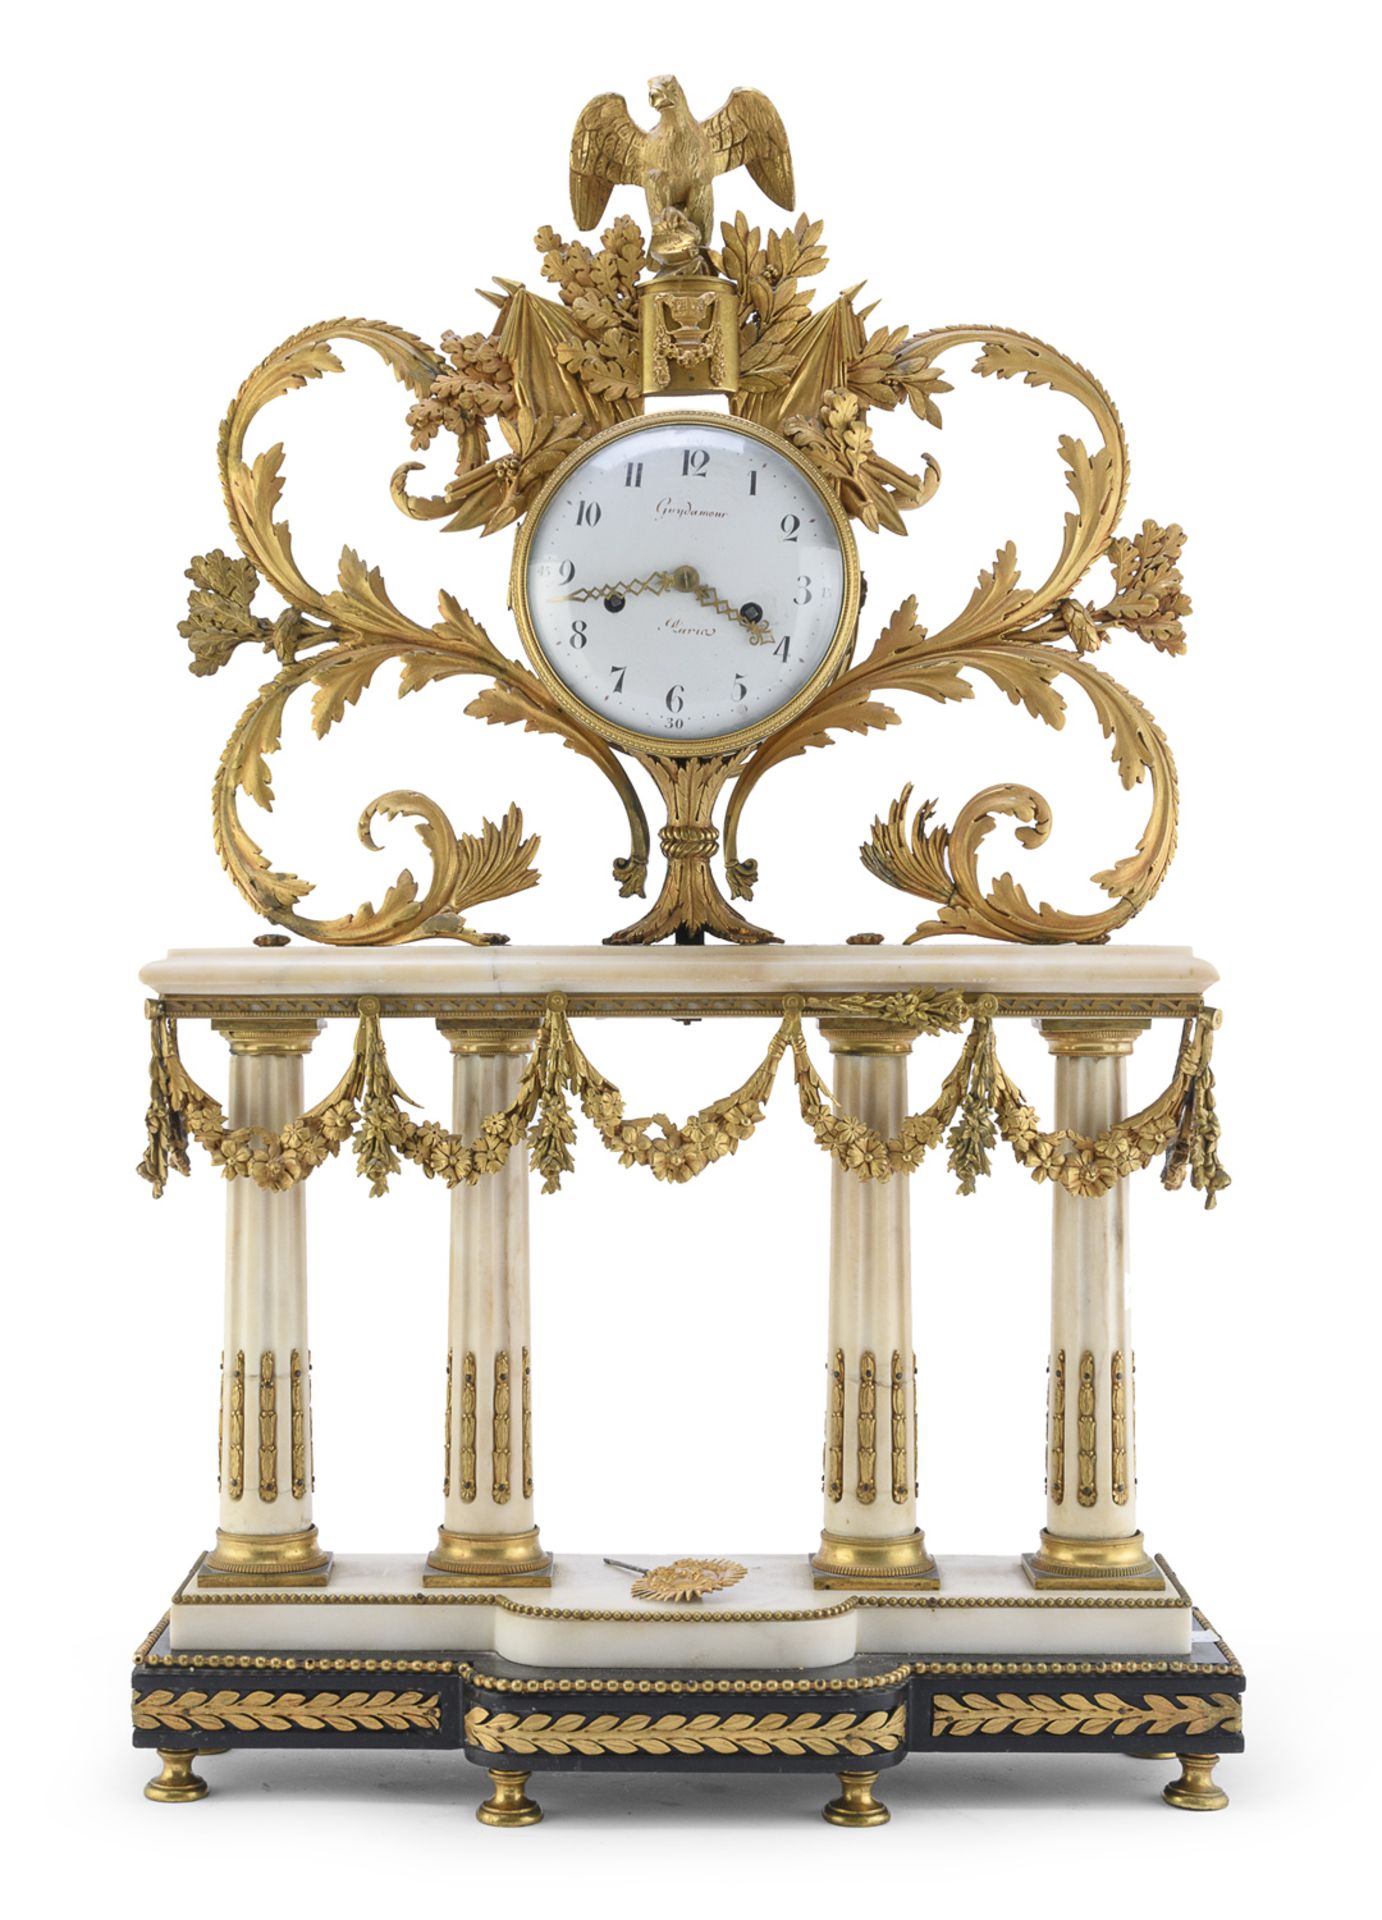 BEAUTIFUL TABLE CLOCK PROBABLY FRANCE LATE 18th CENTURY